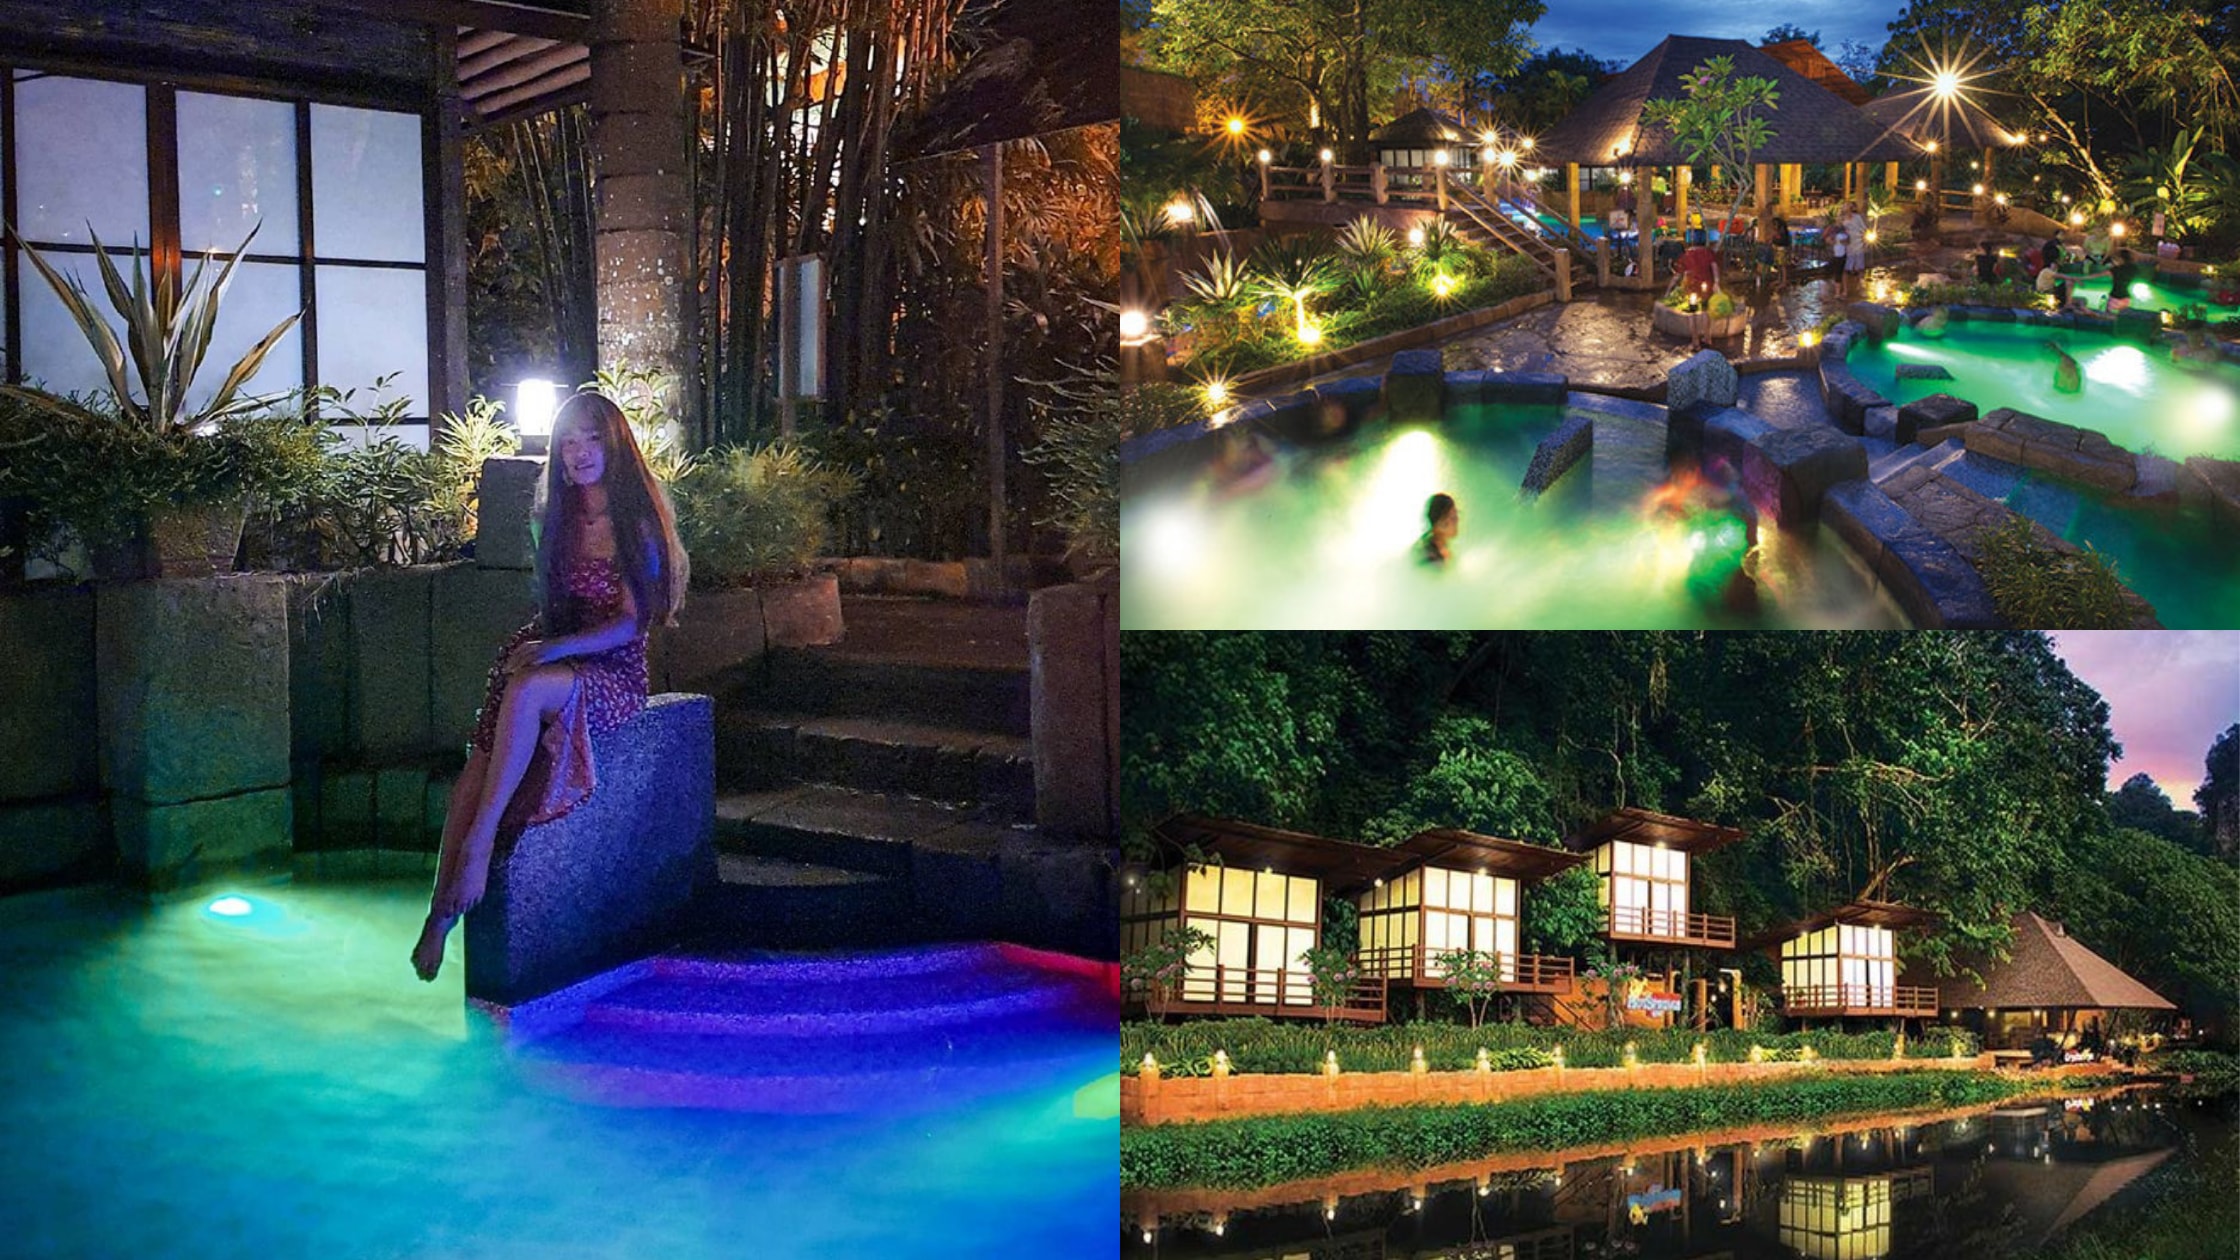 lost world hot springs & spa